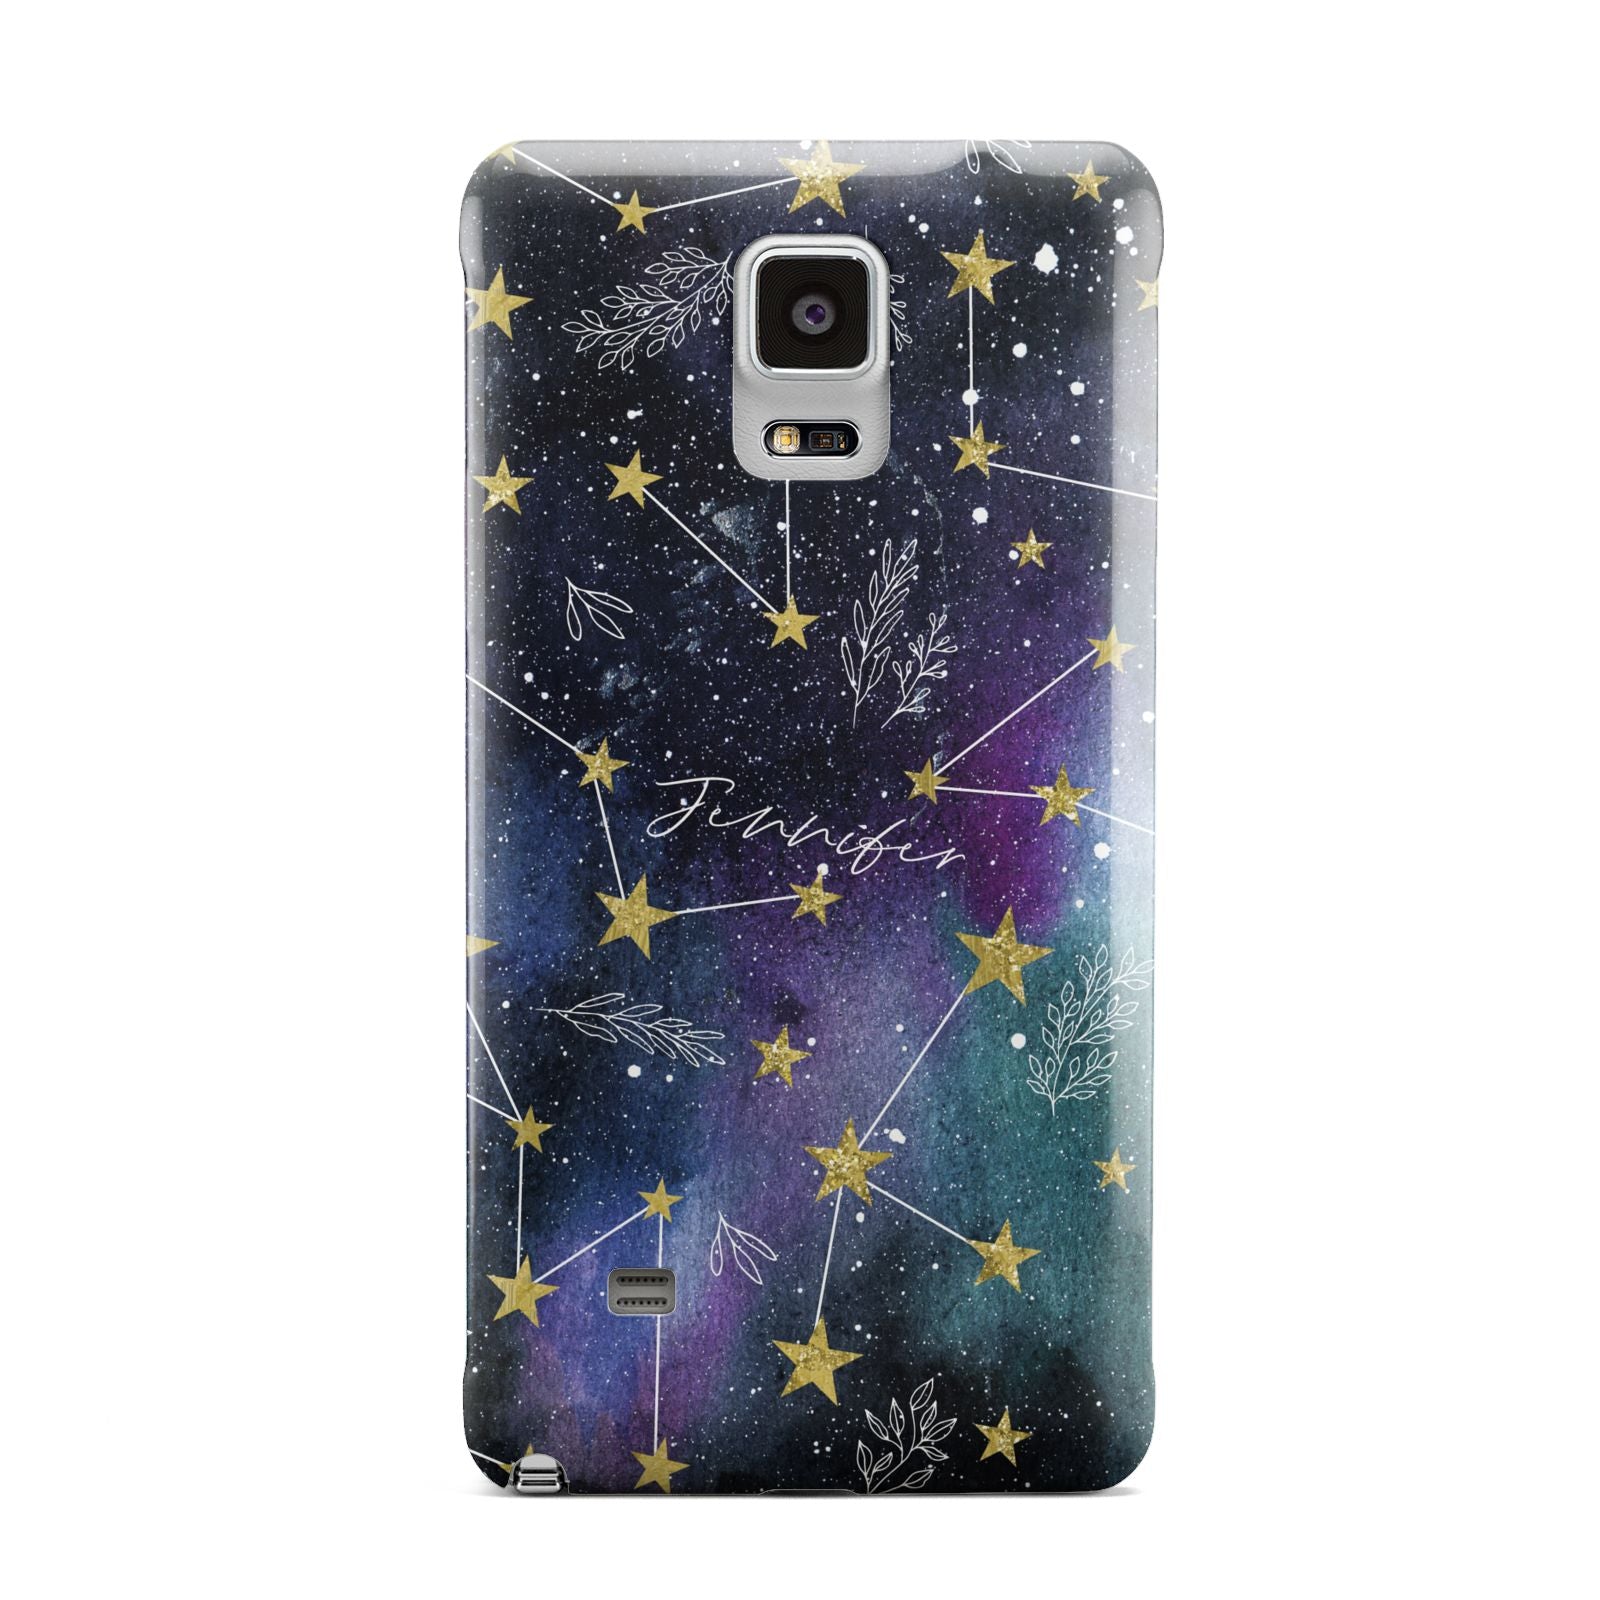 Personalised Constellation Samsung Galaxy Note 4 Case